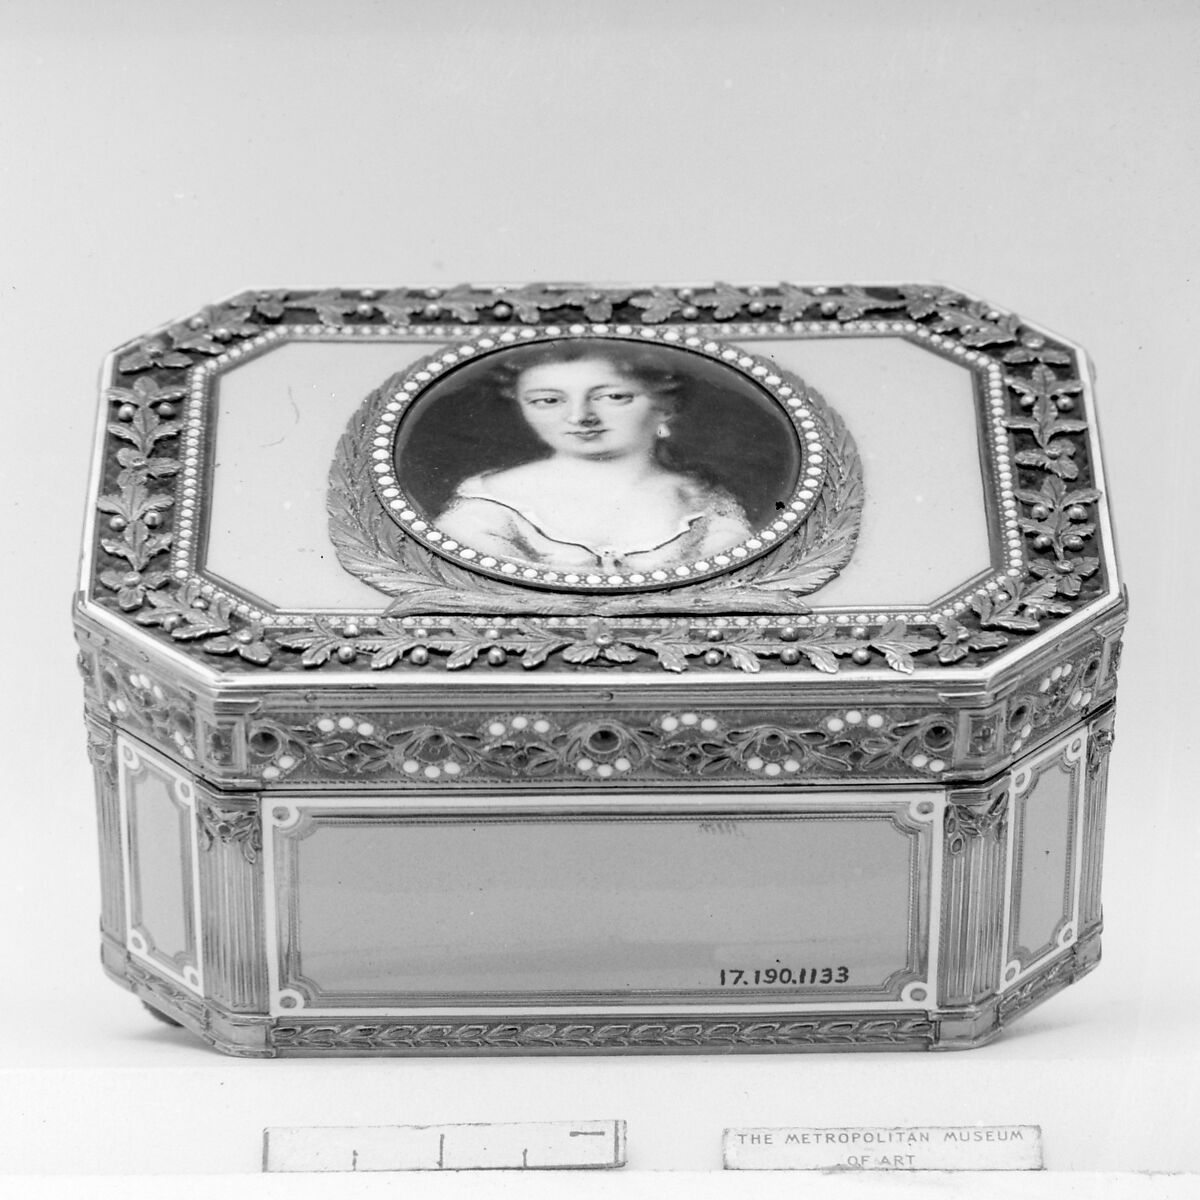 Snuffbox with portrait of a woman, Joseph Etienne Blerzy (French, active 1750–1806), Gold, enamel, French 